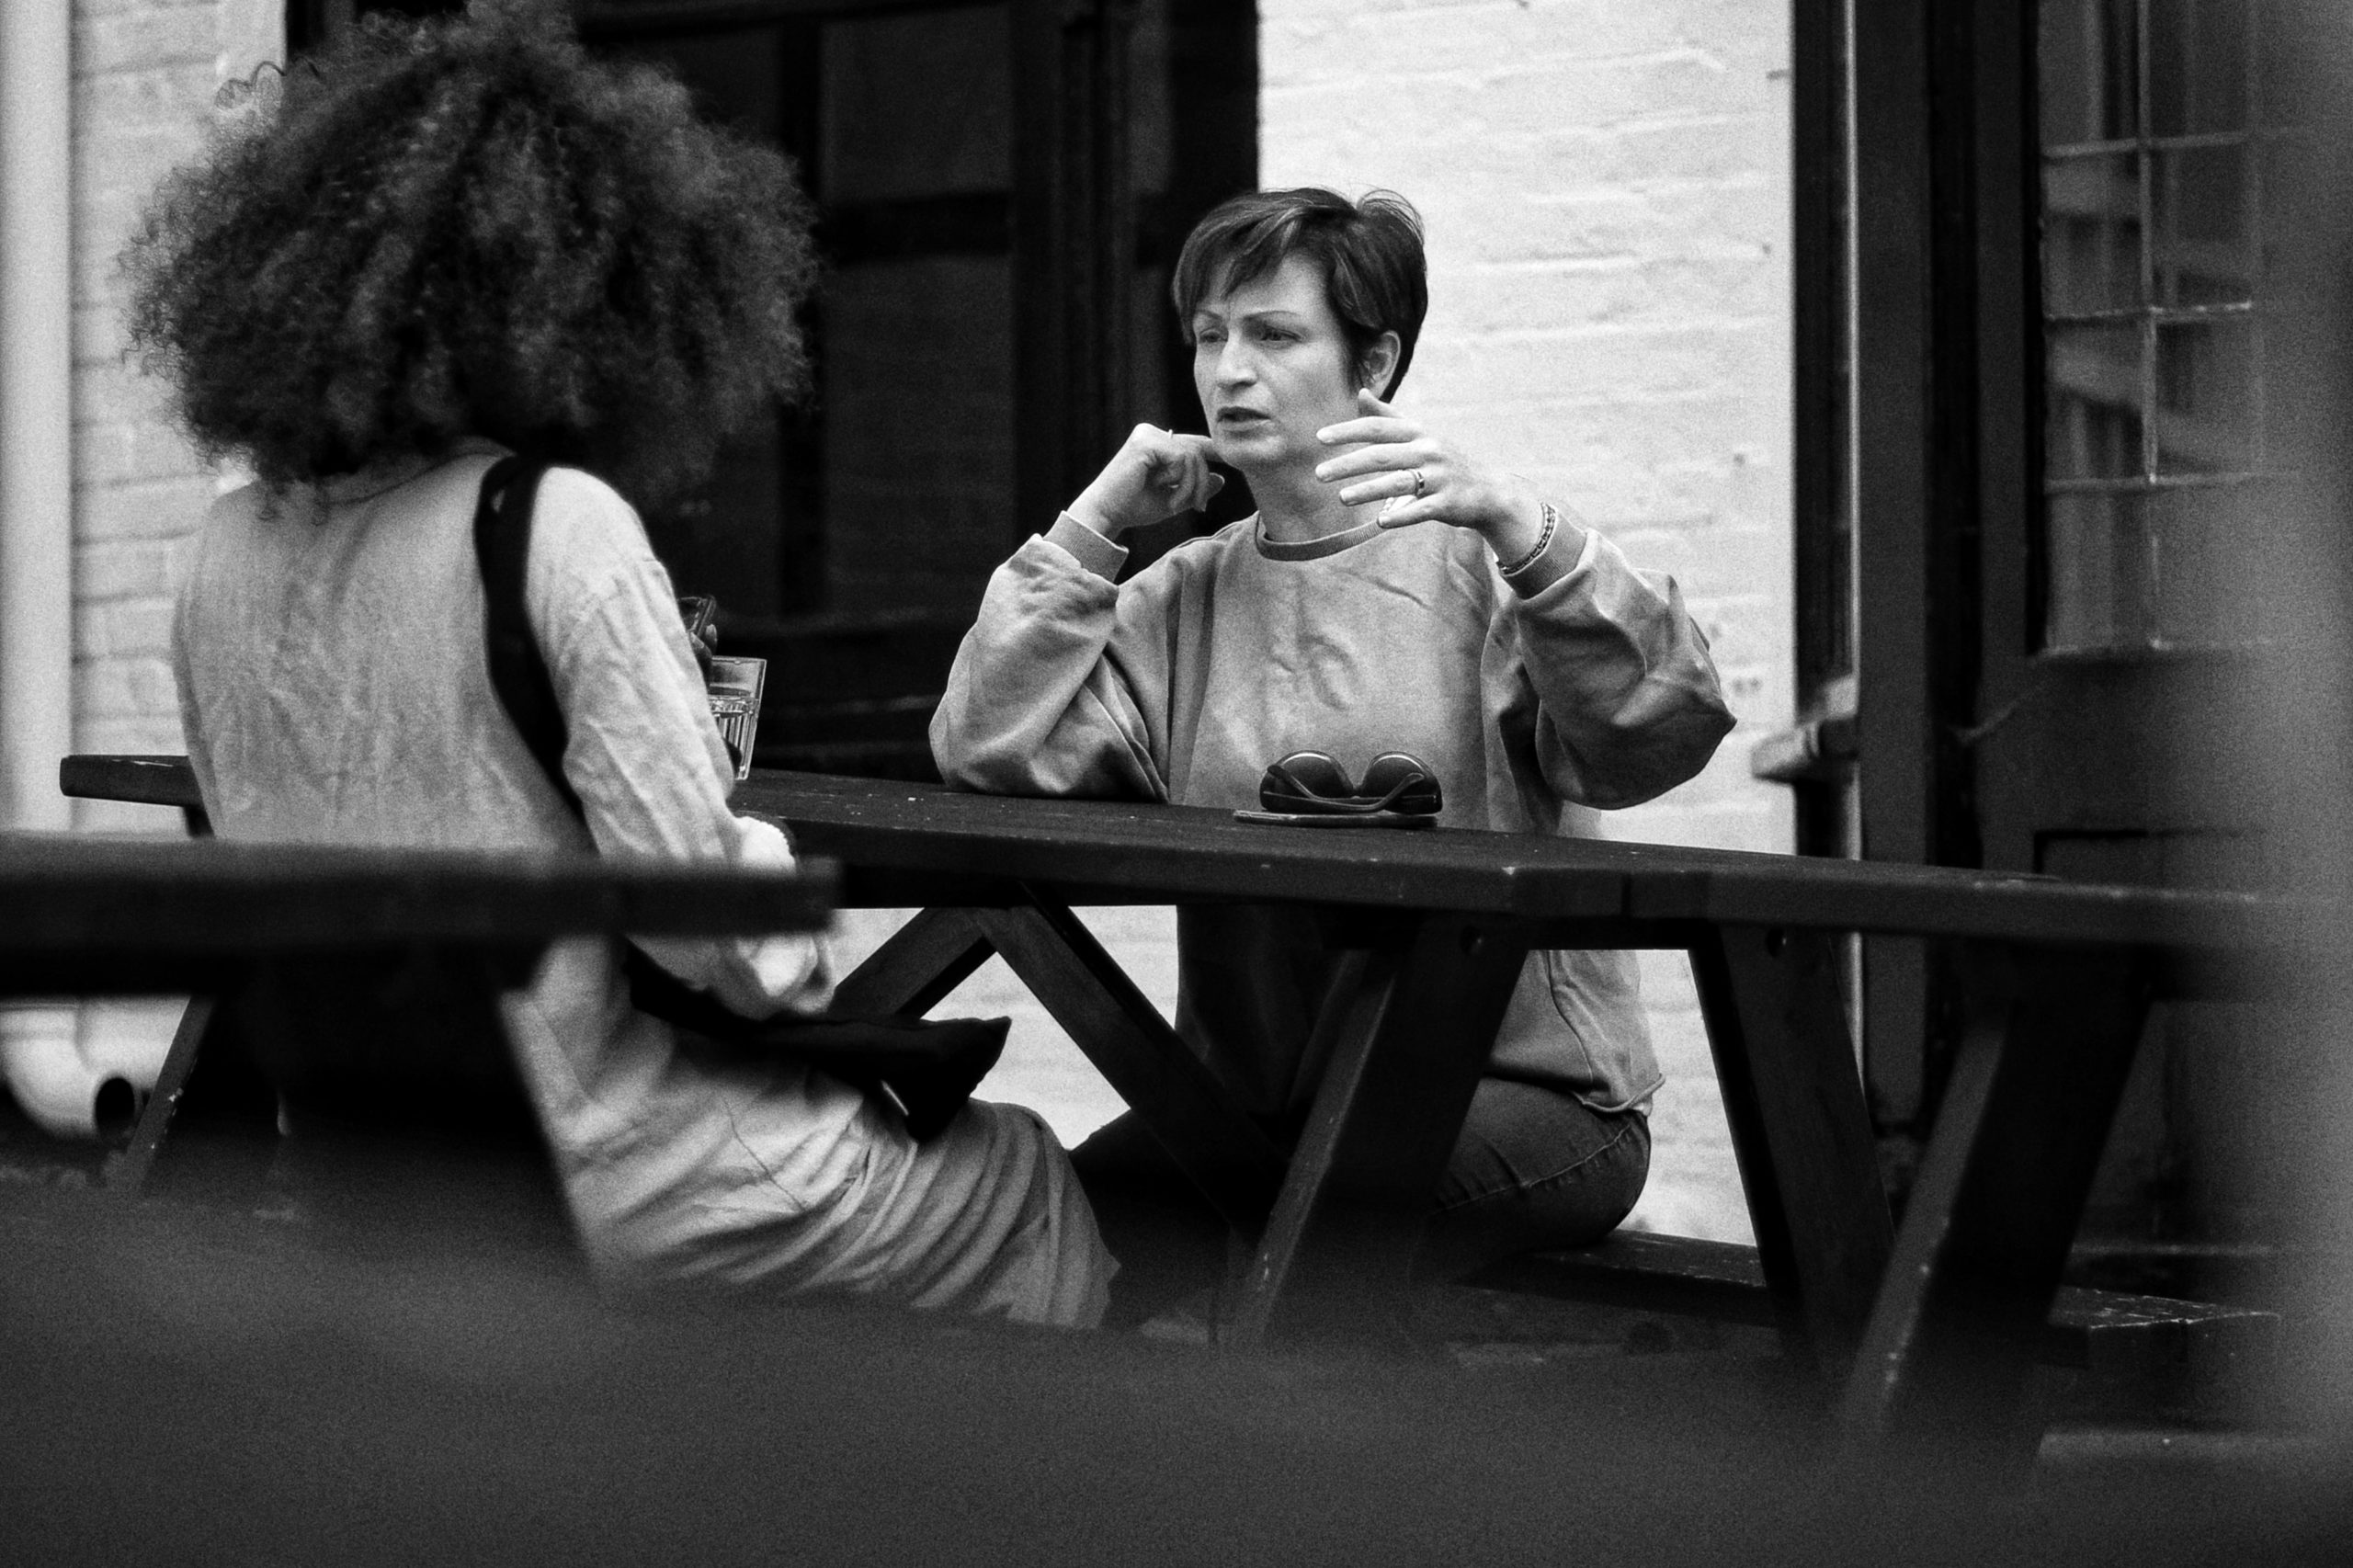 A greyscale image of two women sitting at a picnic table, talking.